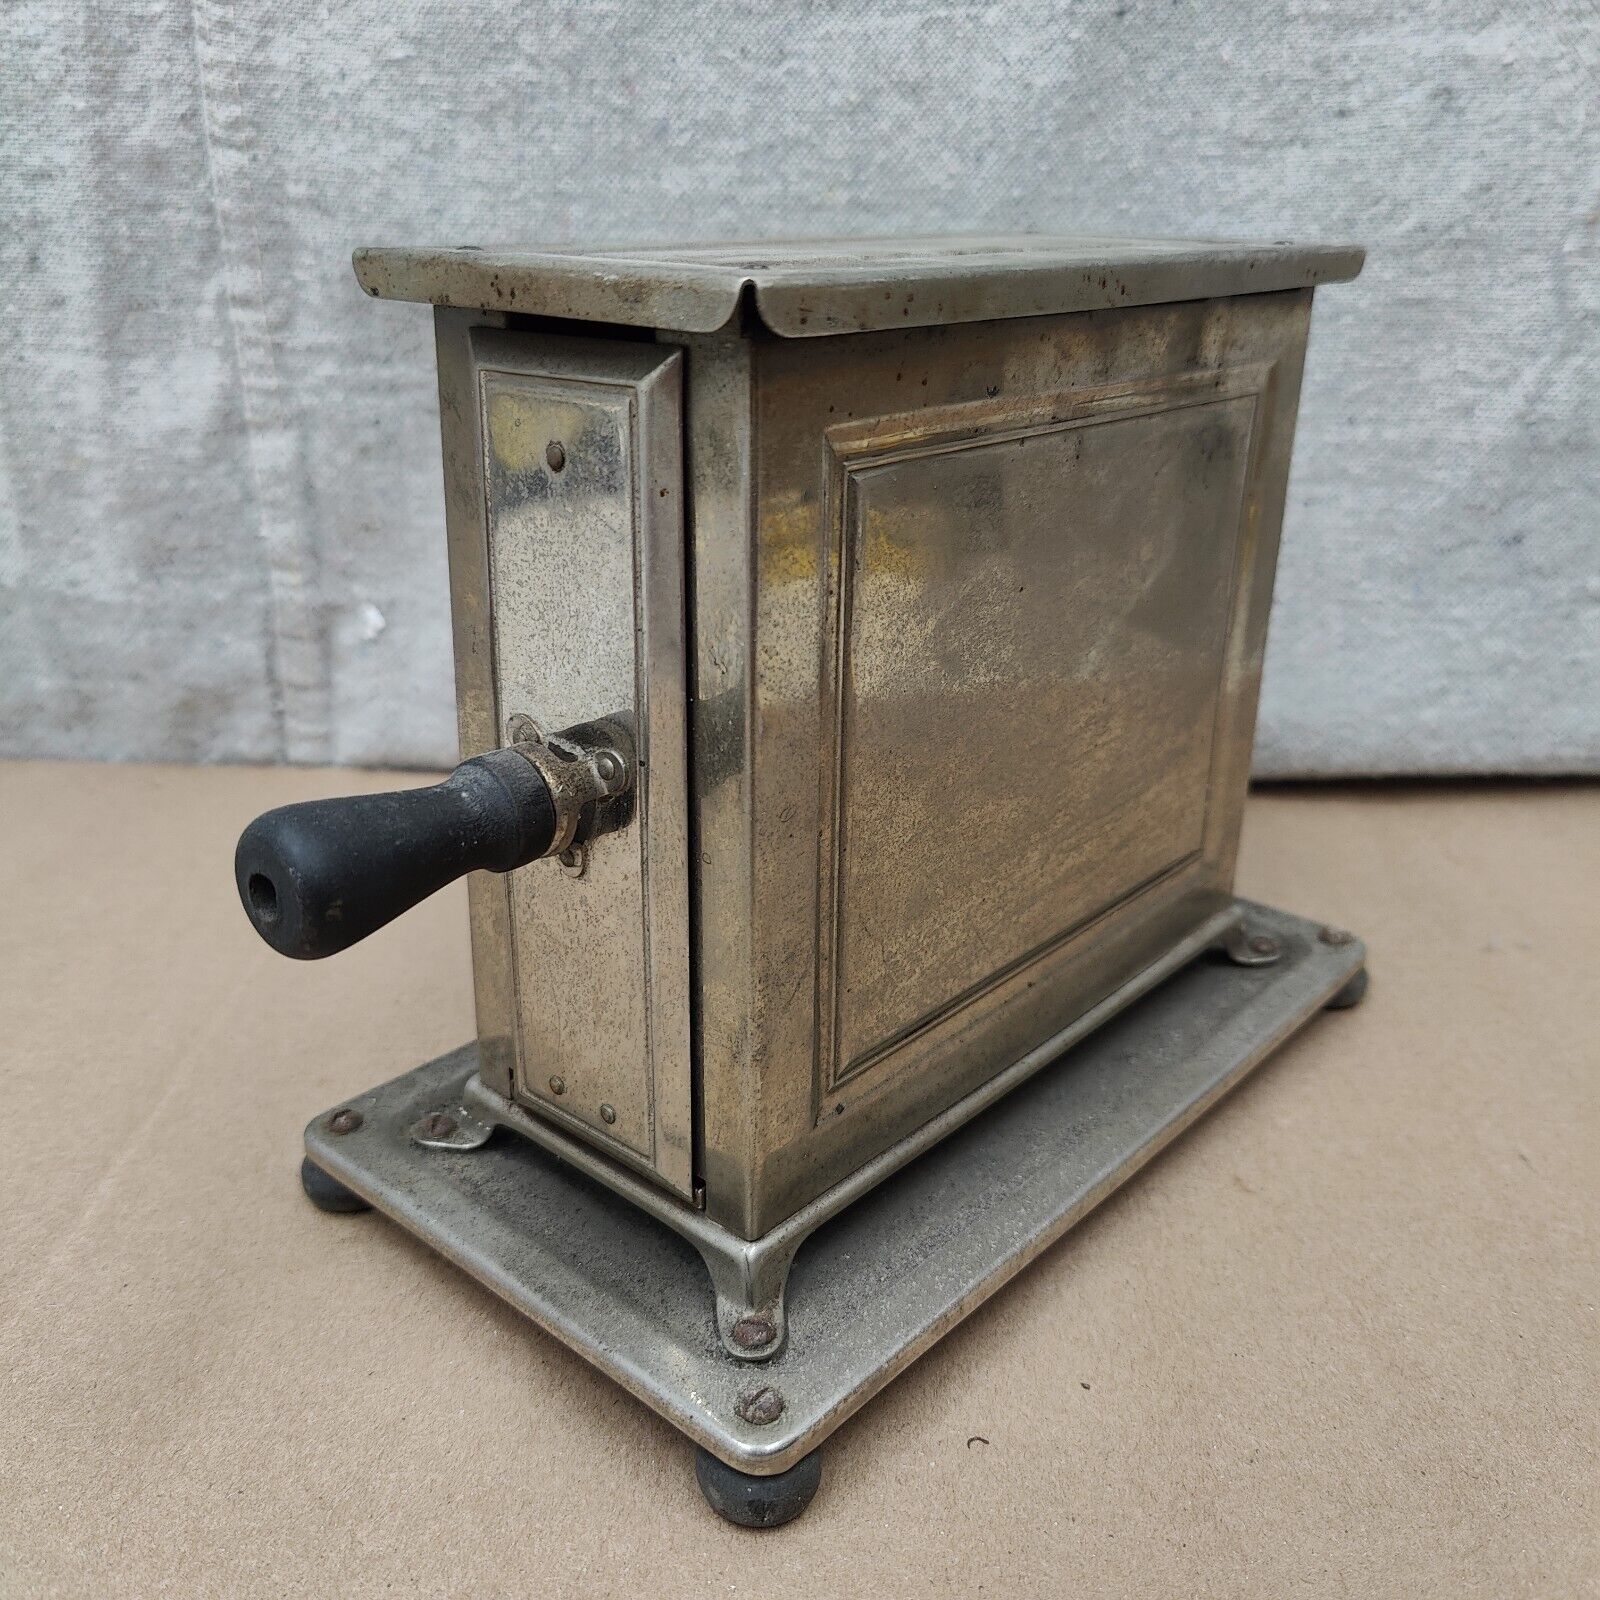 Antique Universal-Landers Frary & Clark Electric Toaster E942